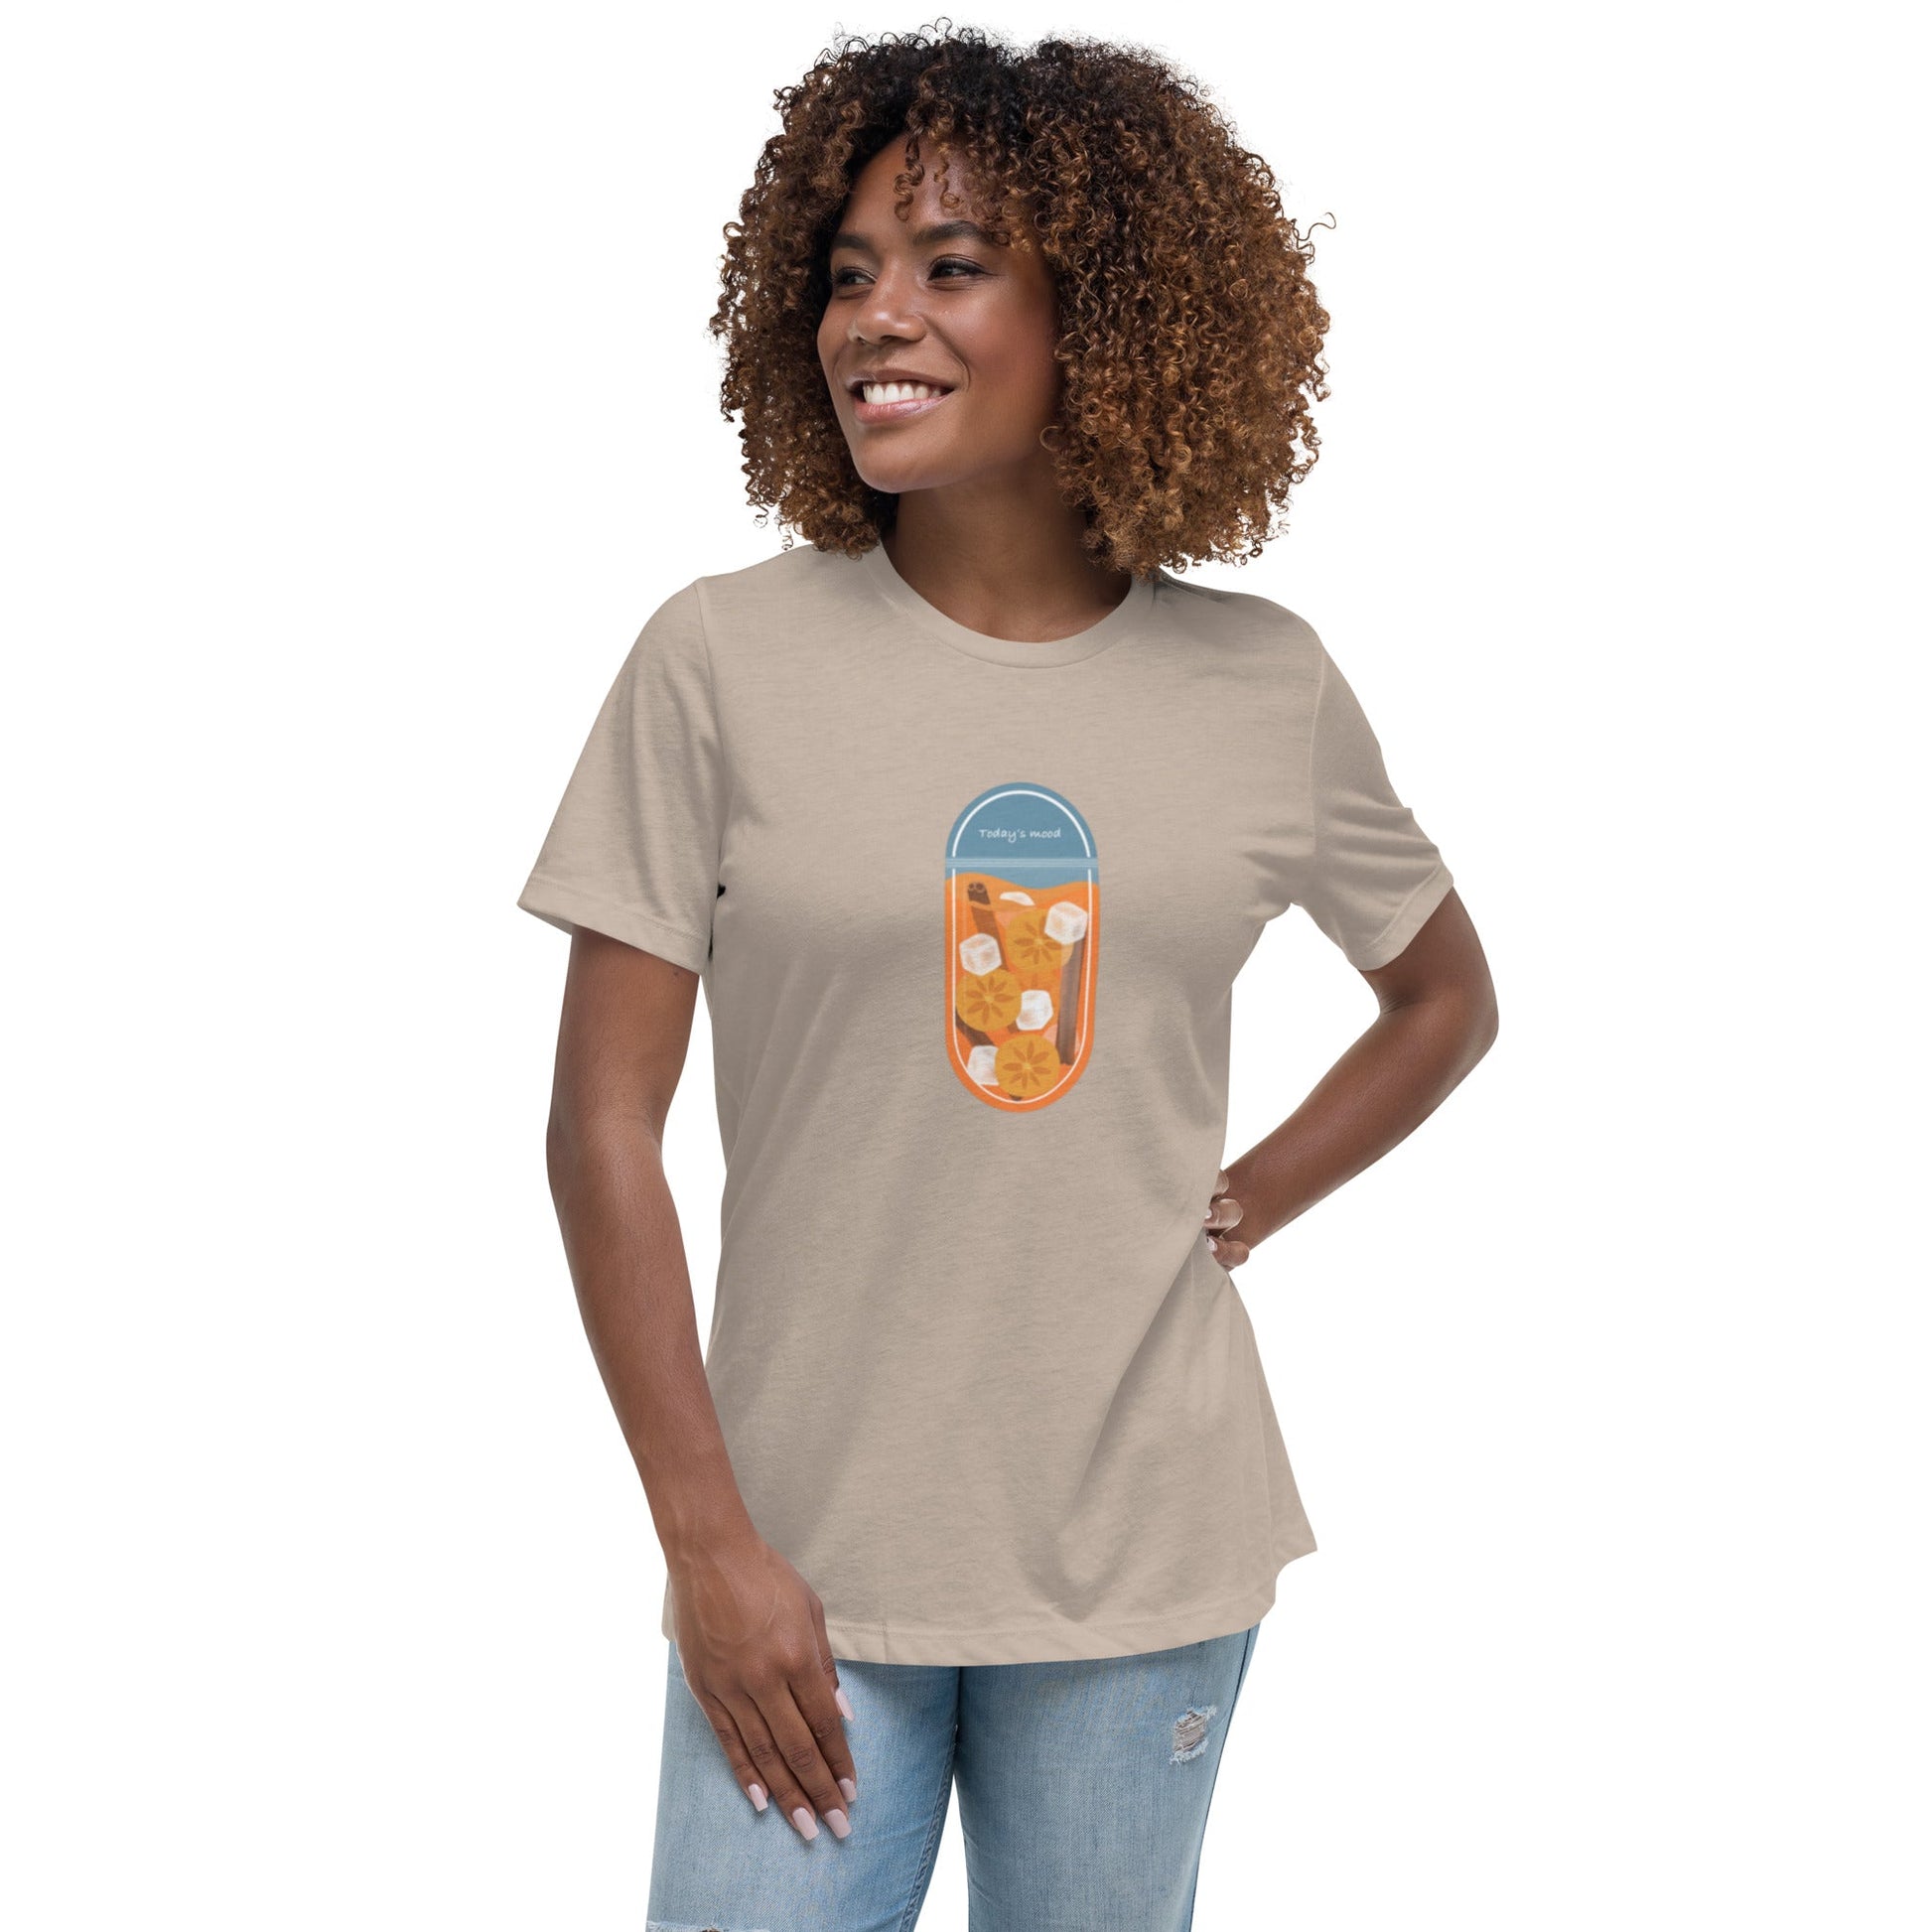 womens-relaxed-tshirt-todays-mood-11-heather-stone